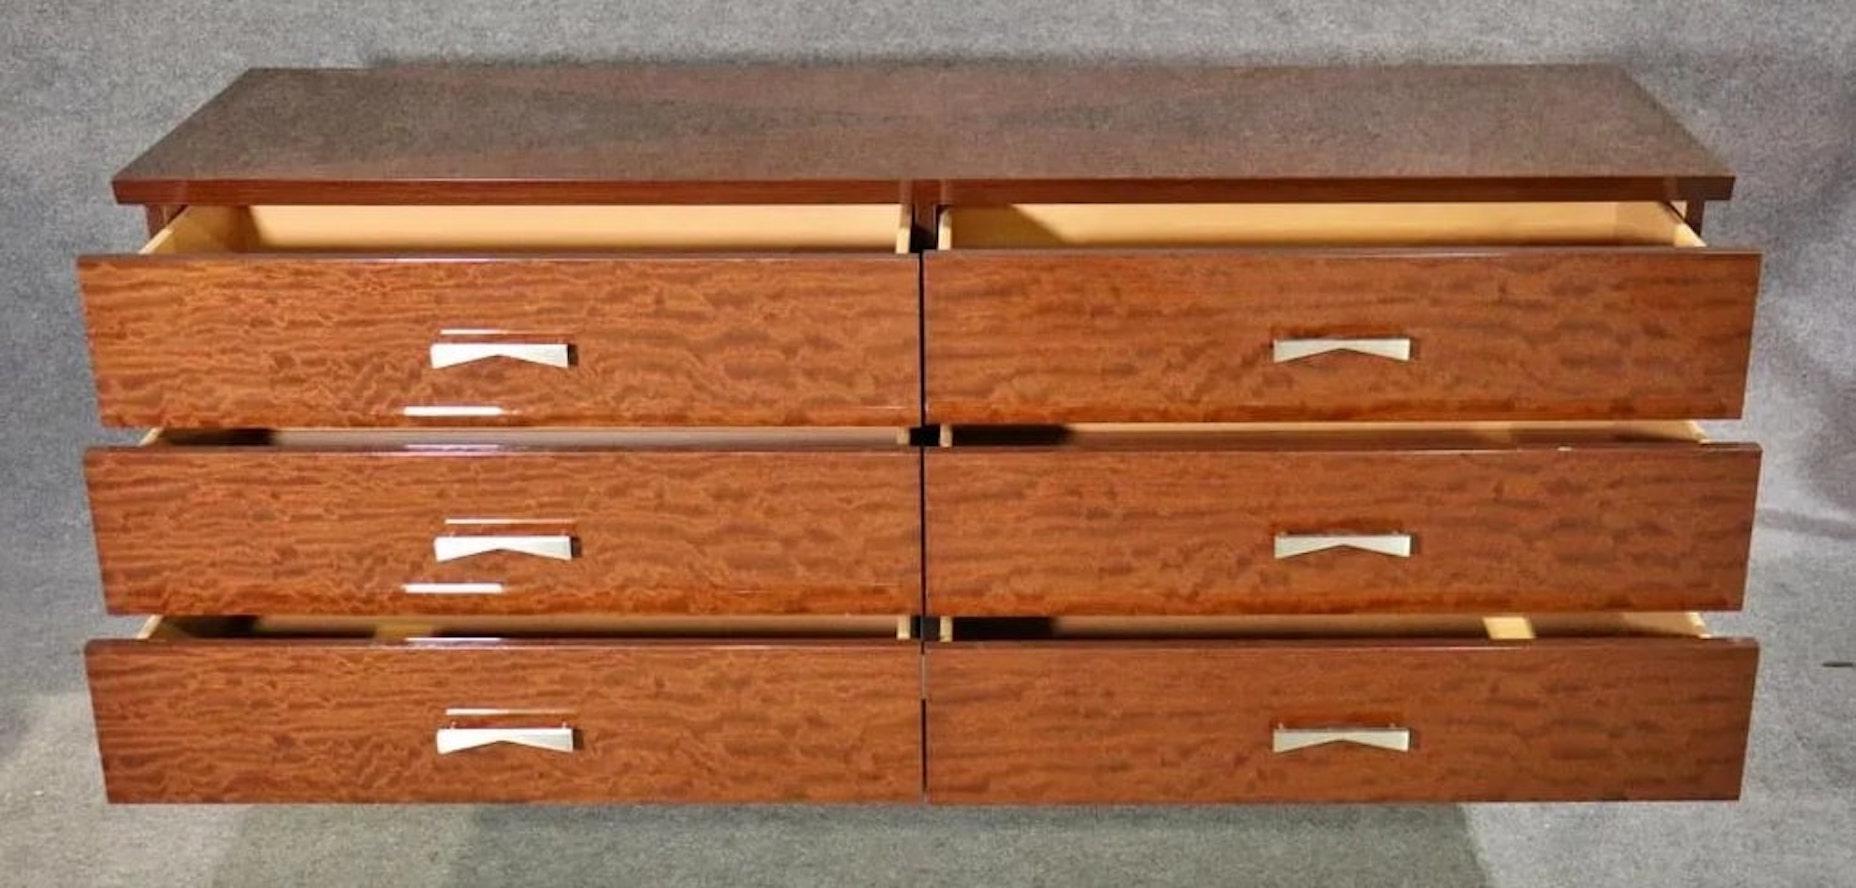 Stunning chest of drawers in wild grain wood. Sharp modern lines from the opposing grain patterned X top, to the X shaped metal base. Six wide drawers with bow-tie metal handles. Great design throughout.
Please confirm location NY or NJ.